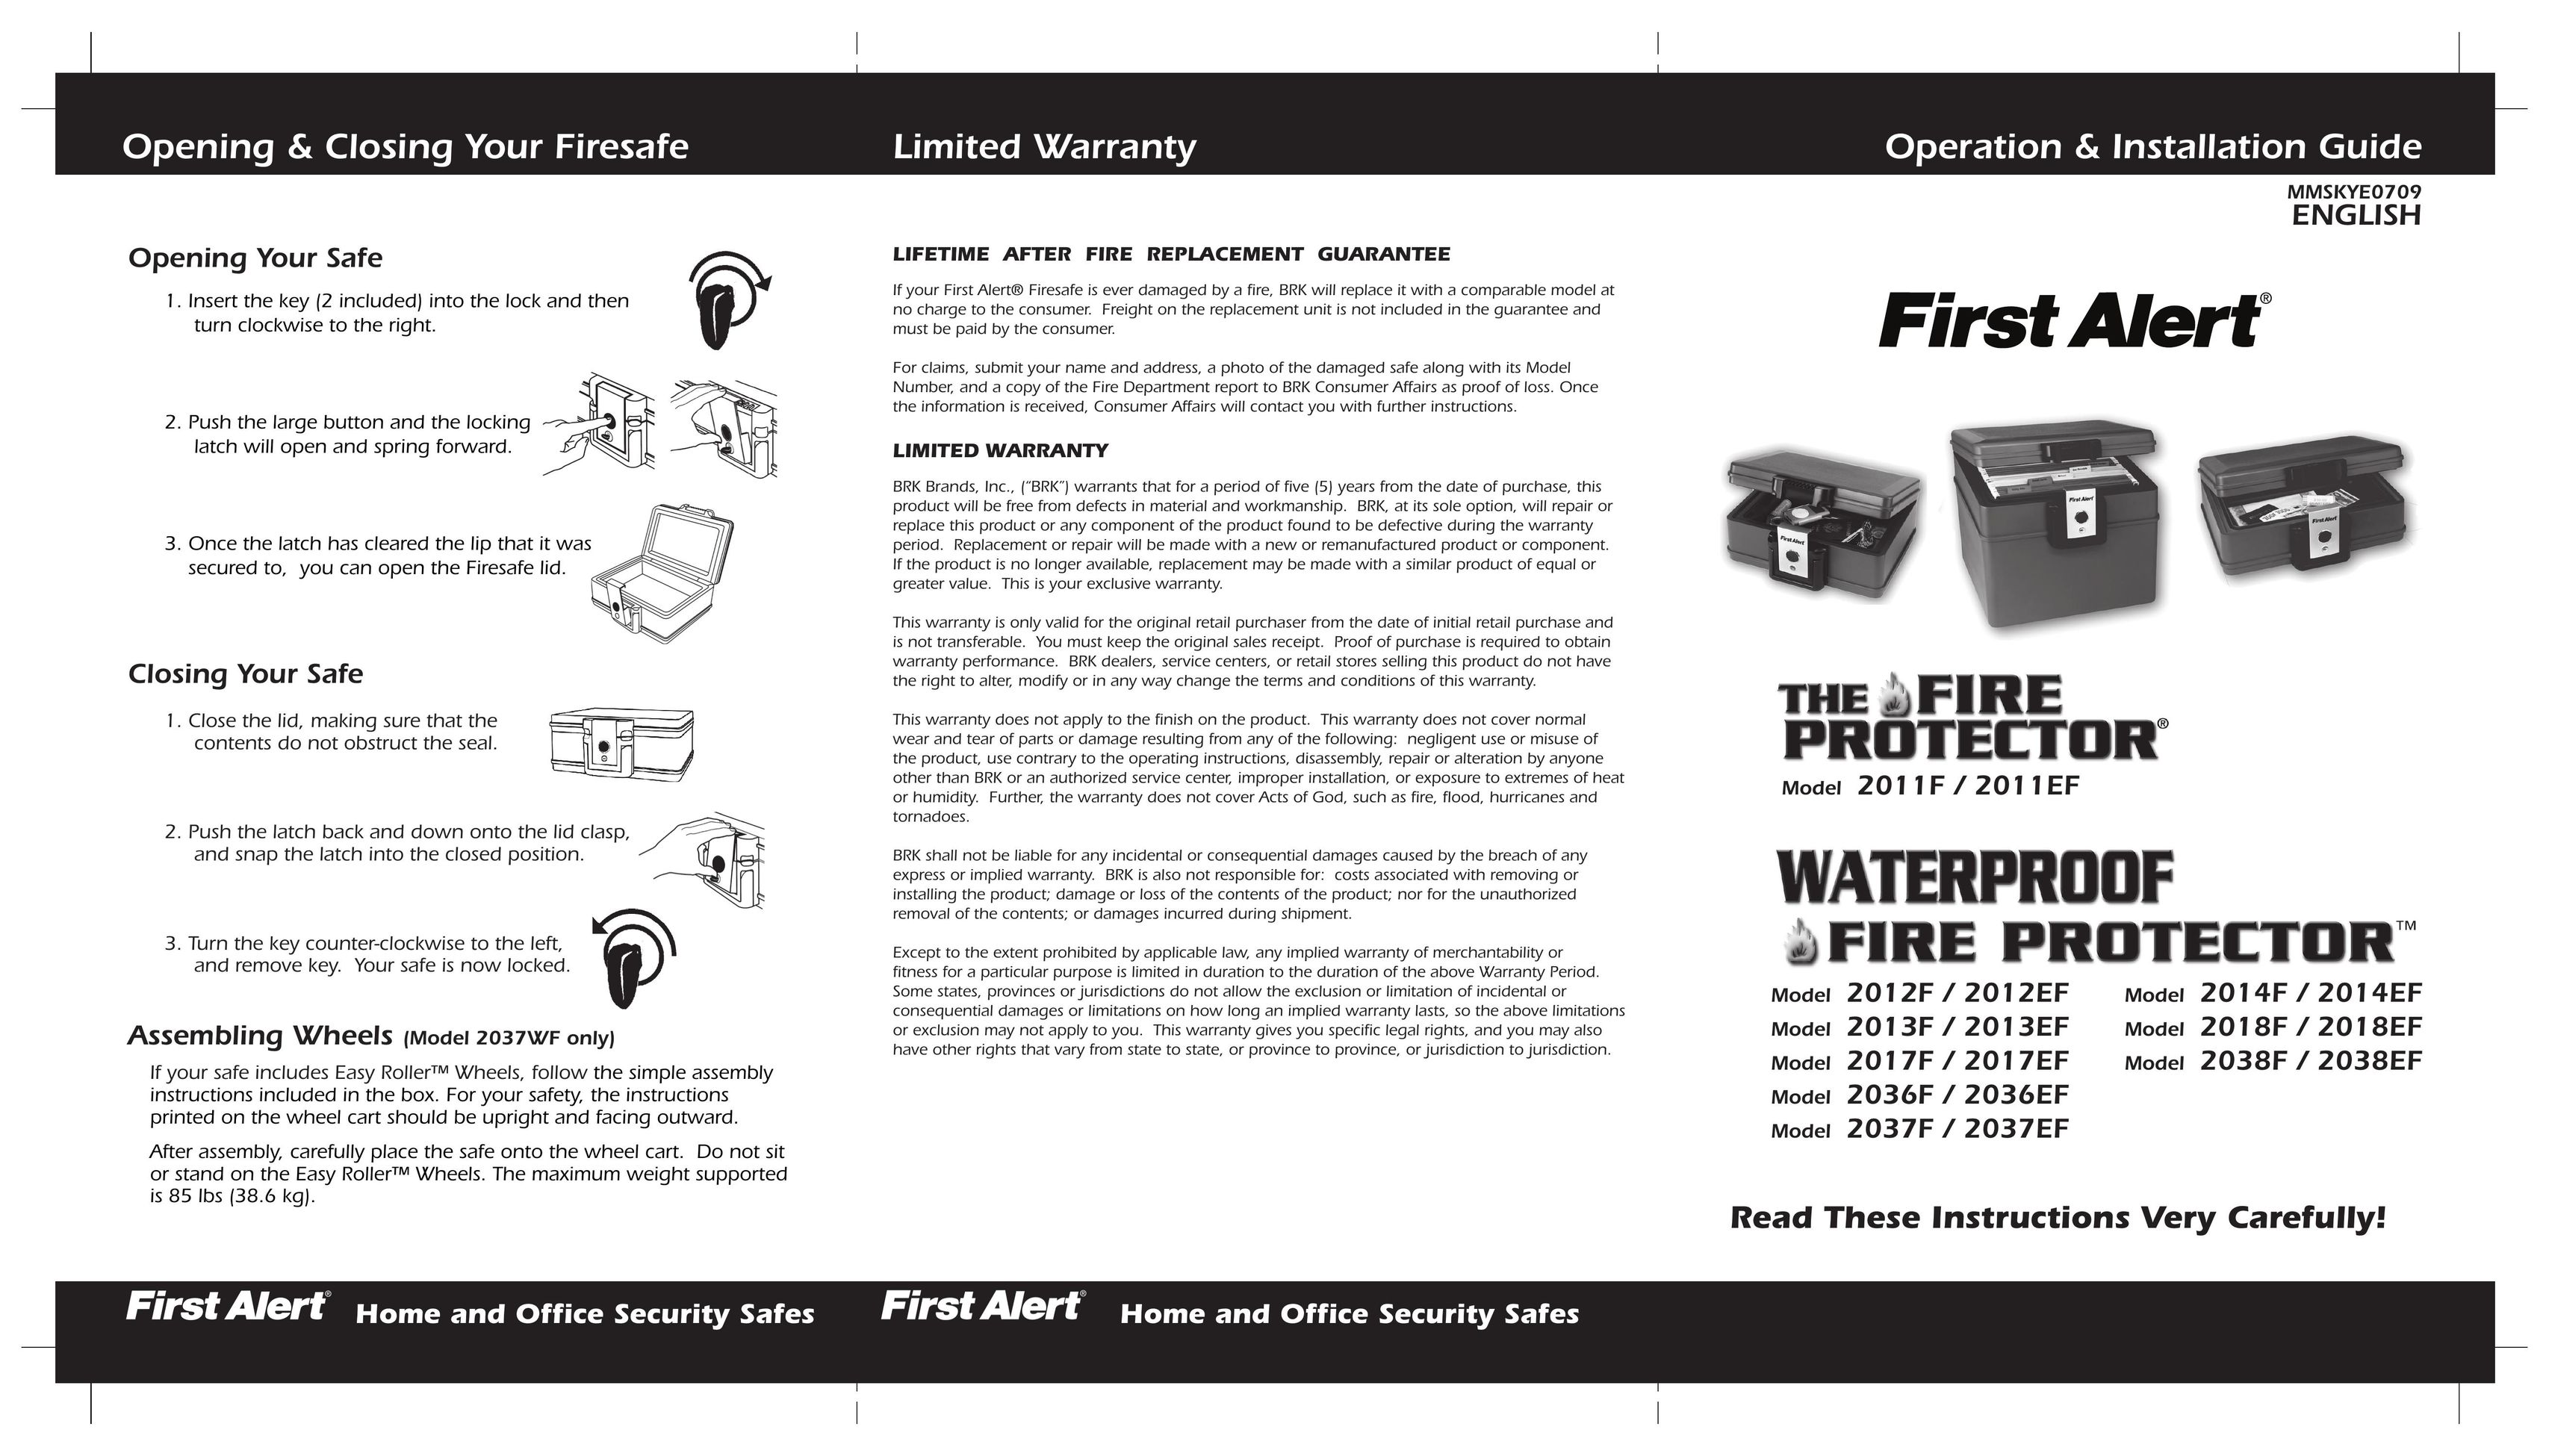 First Alert MMSKYE0709 Home Safety Product User Manual